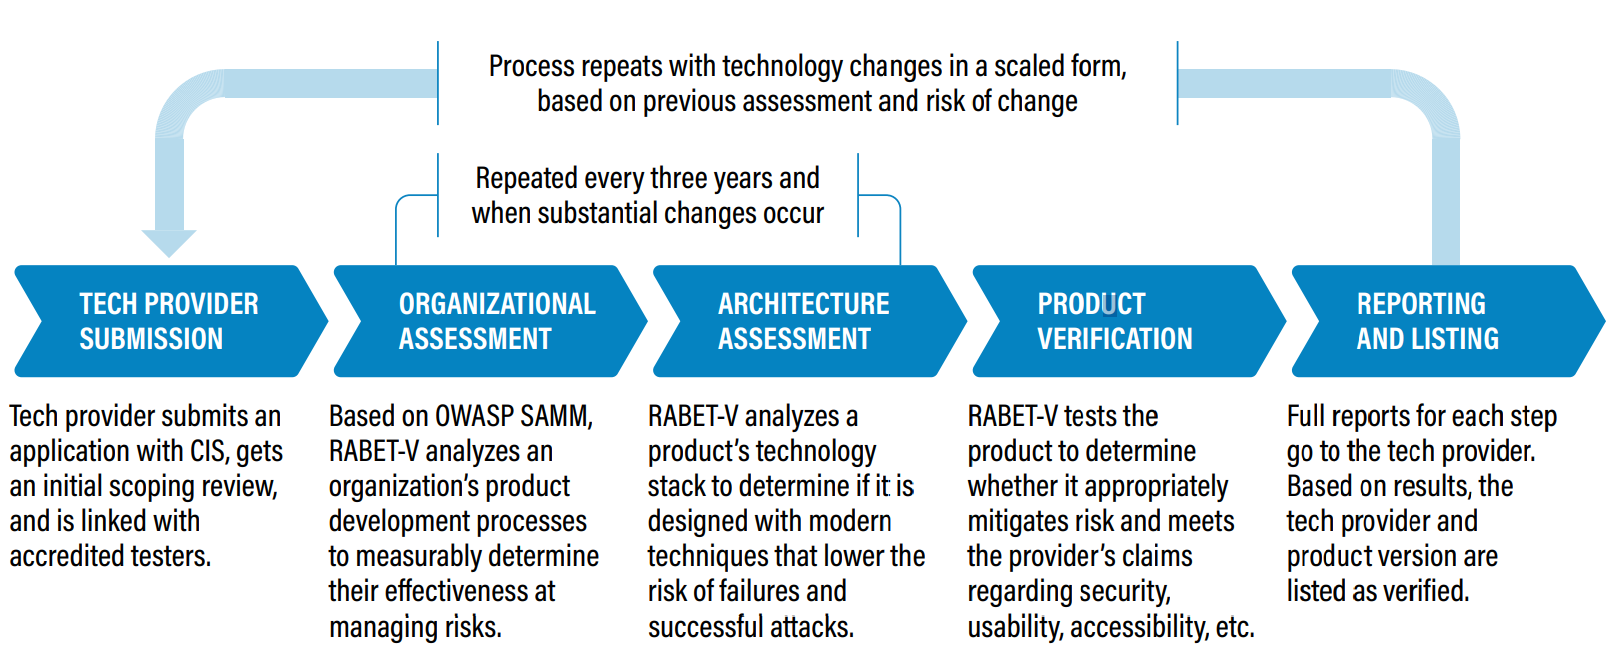  an overview of RABET-V Process 